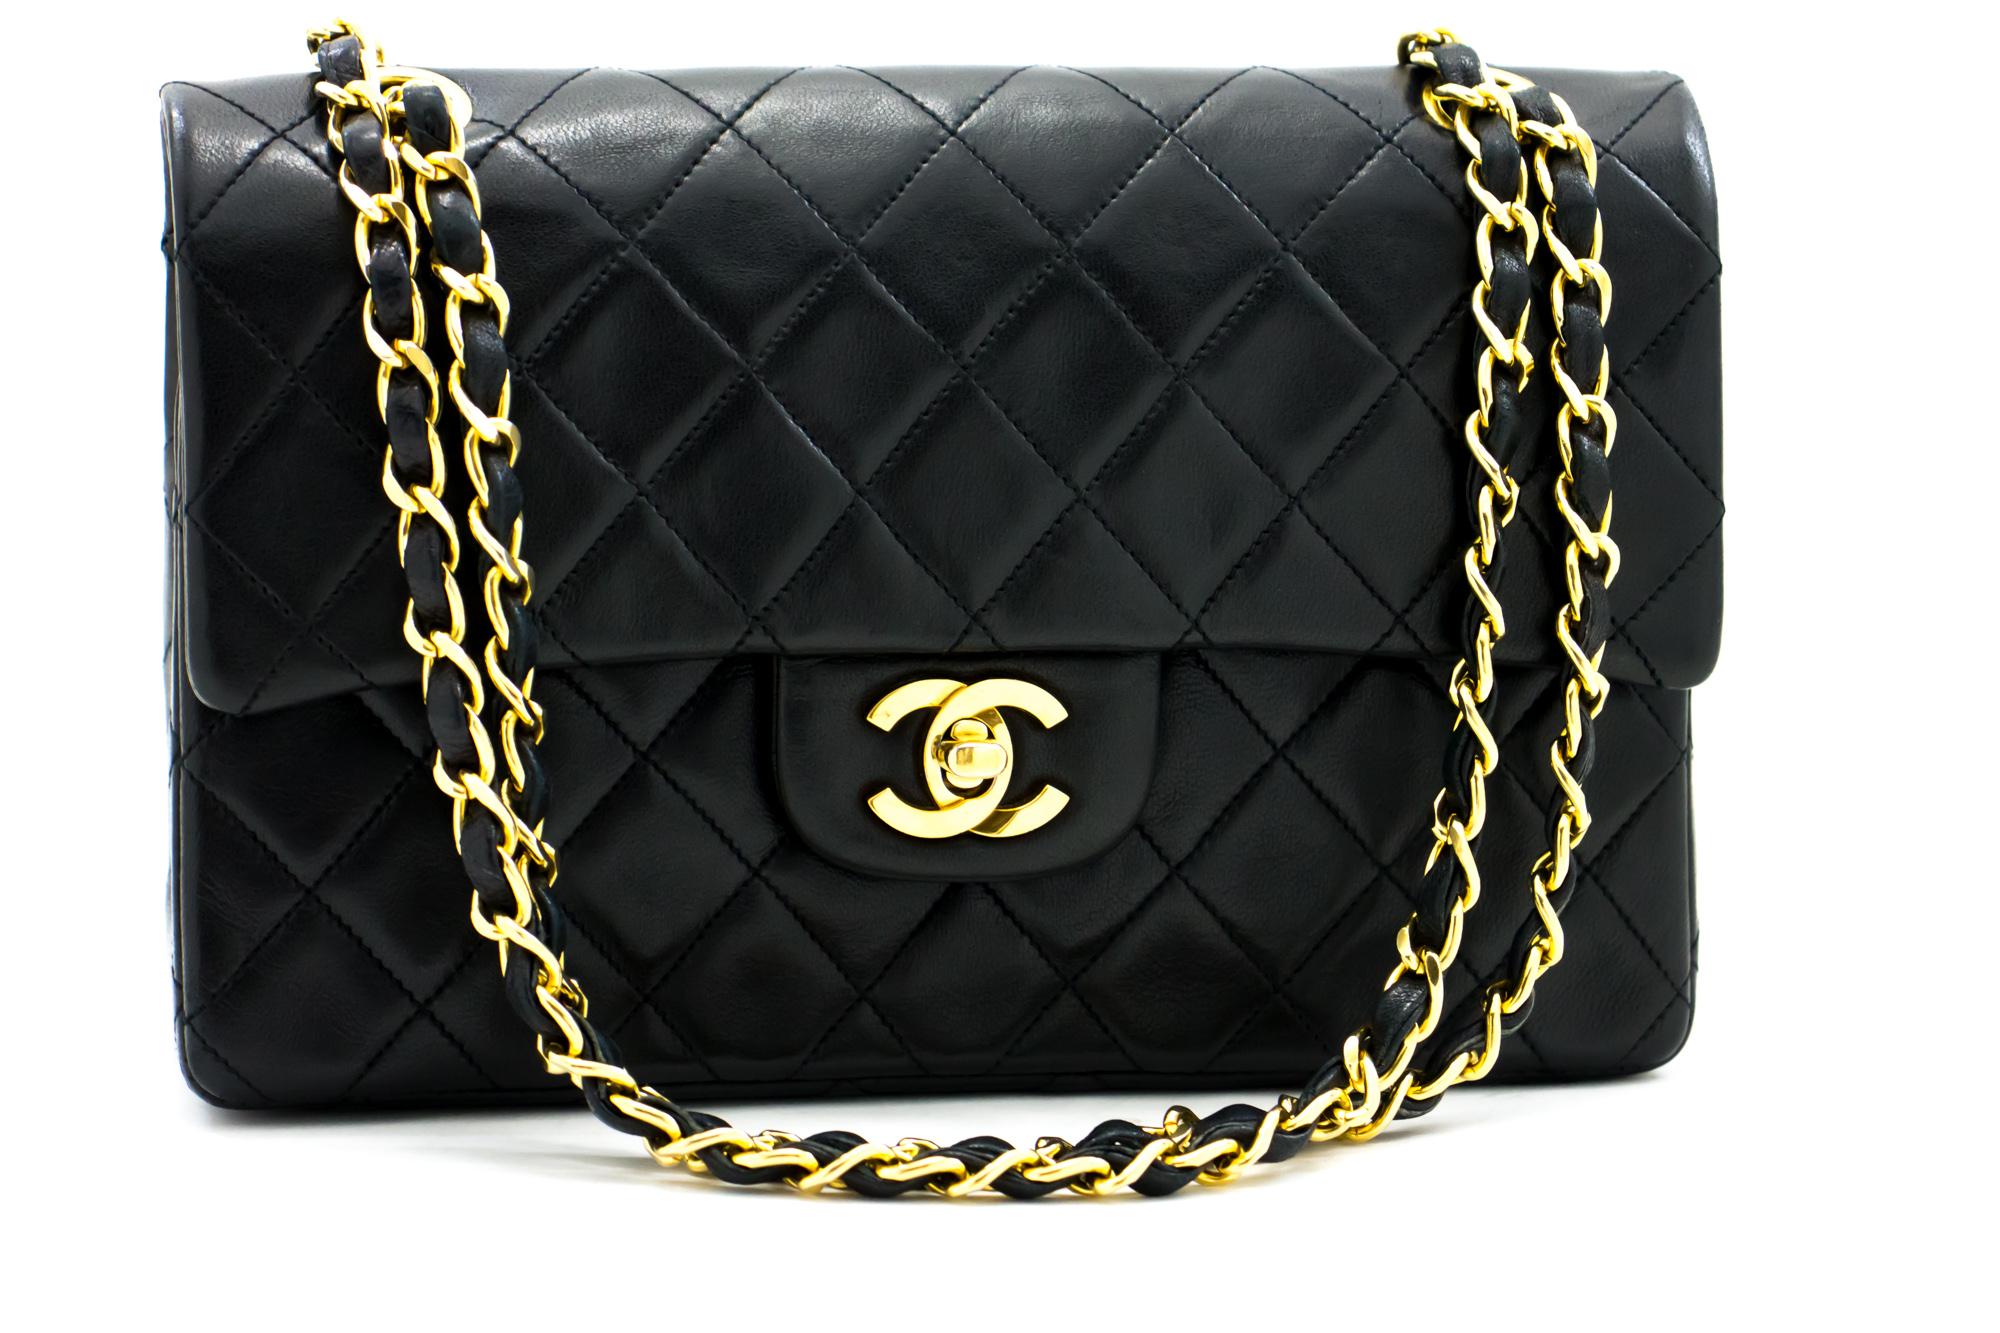 An authentic CHANEL 2.55 Classic Double Flap Small Chain Shoulder Bag Black made of black Lambskin. The color is Black. The outside material is Leather. The pattern is Solid. This item is Vintage / Classic. The year of manufacture would be